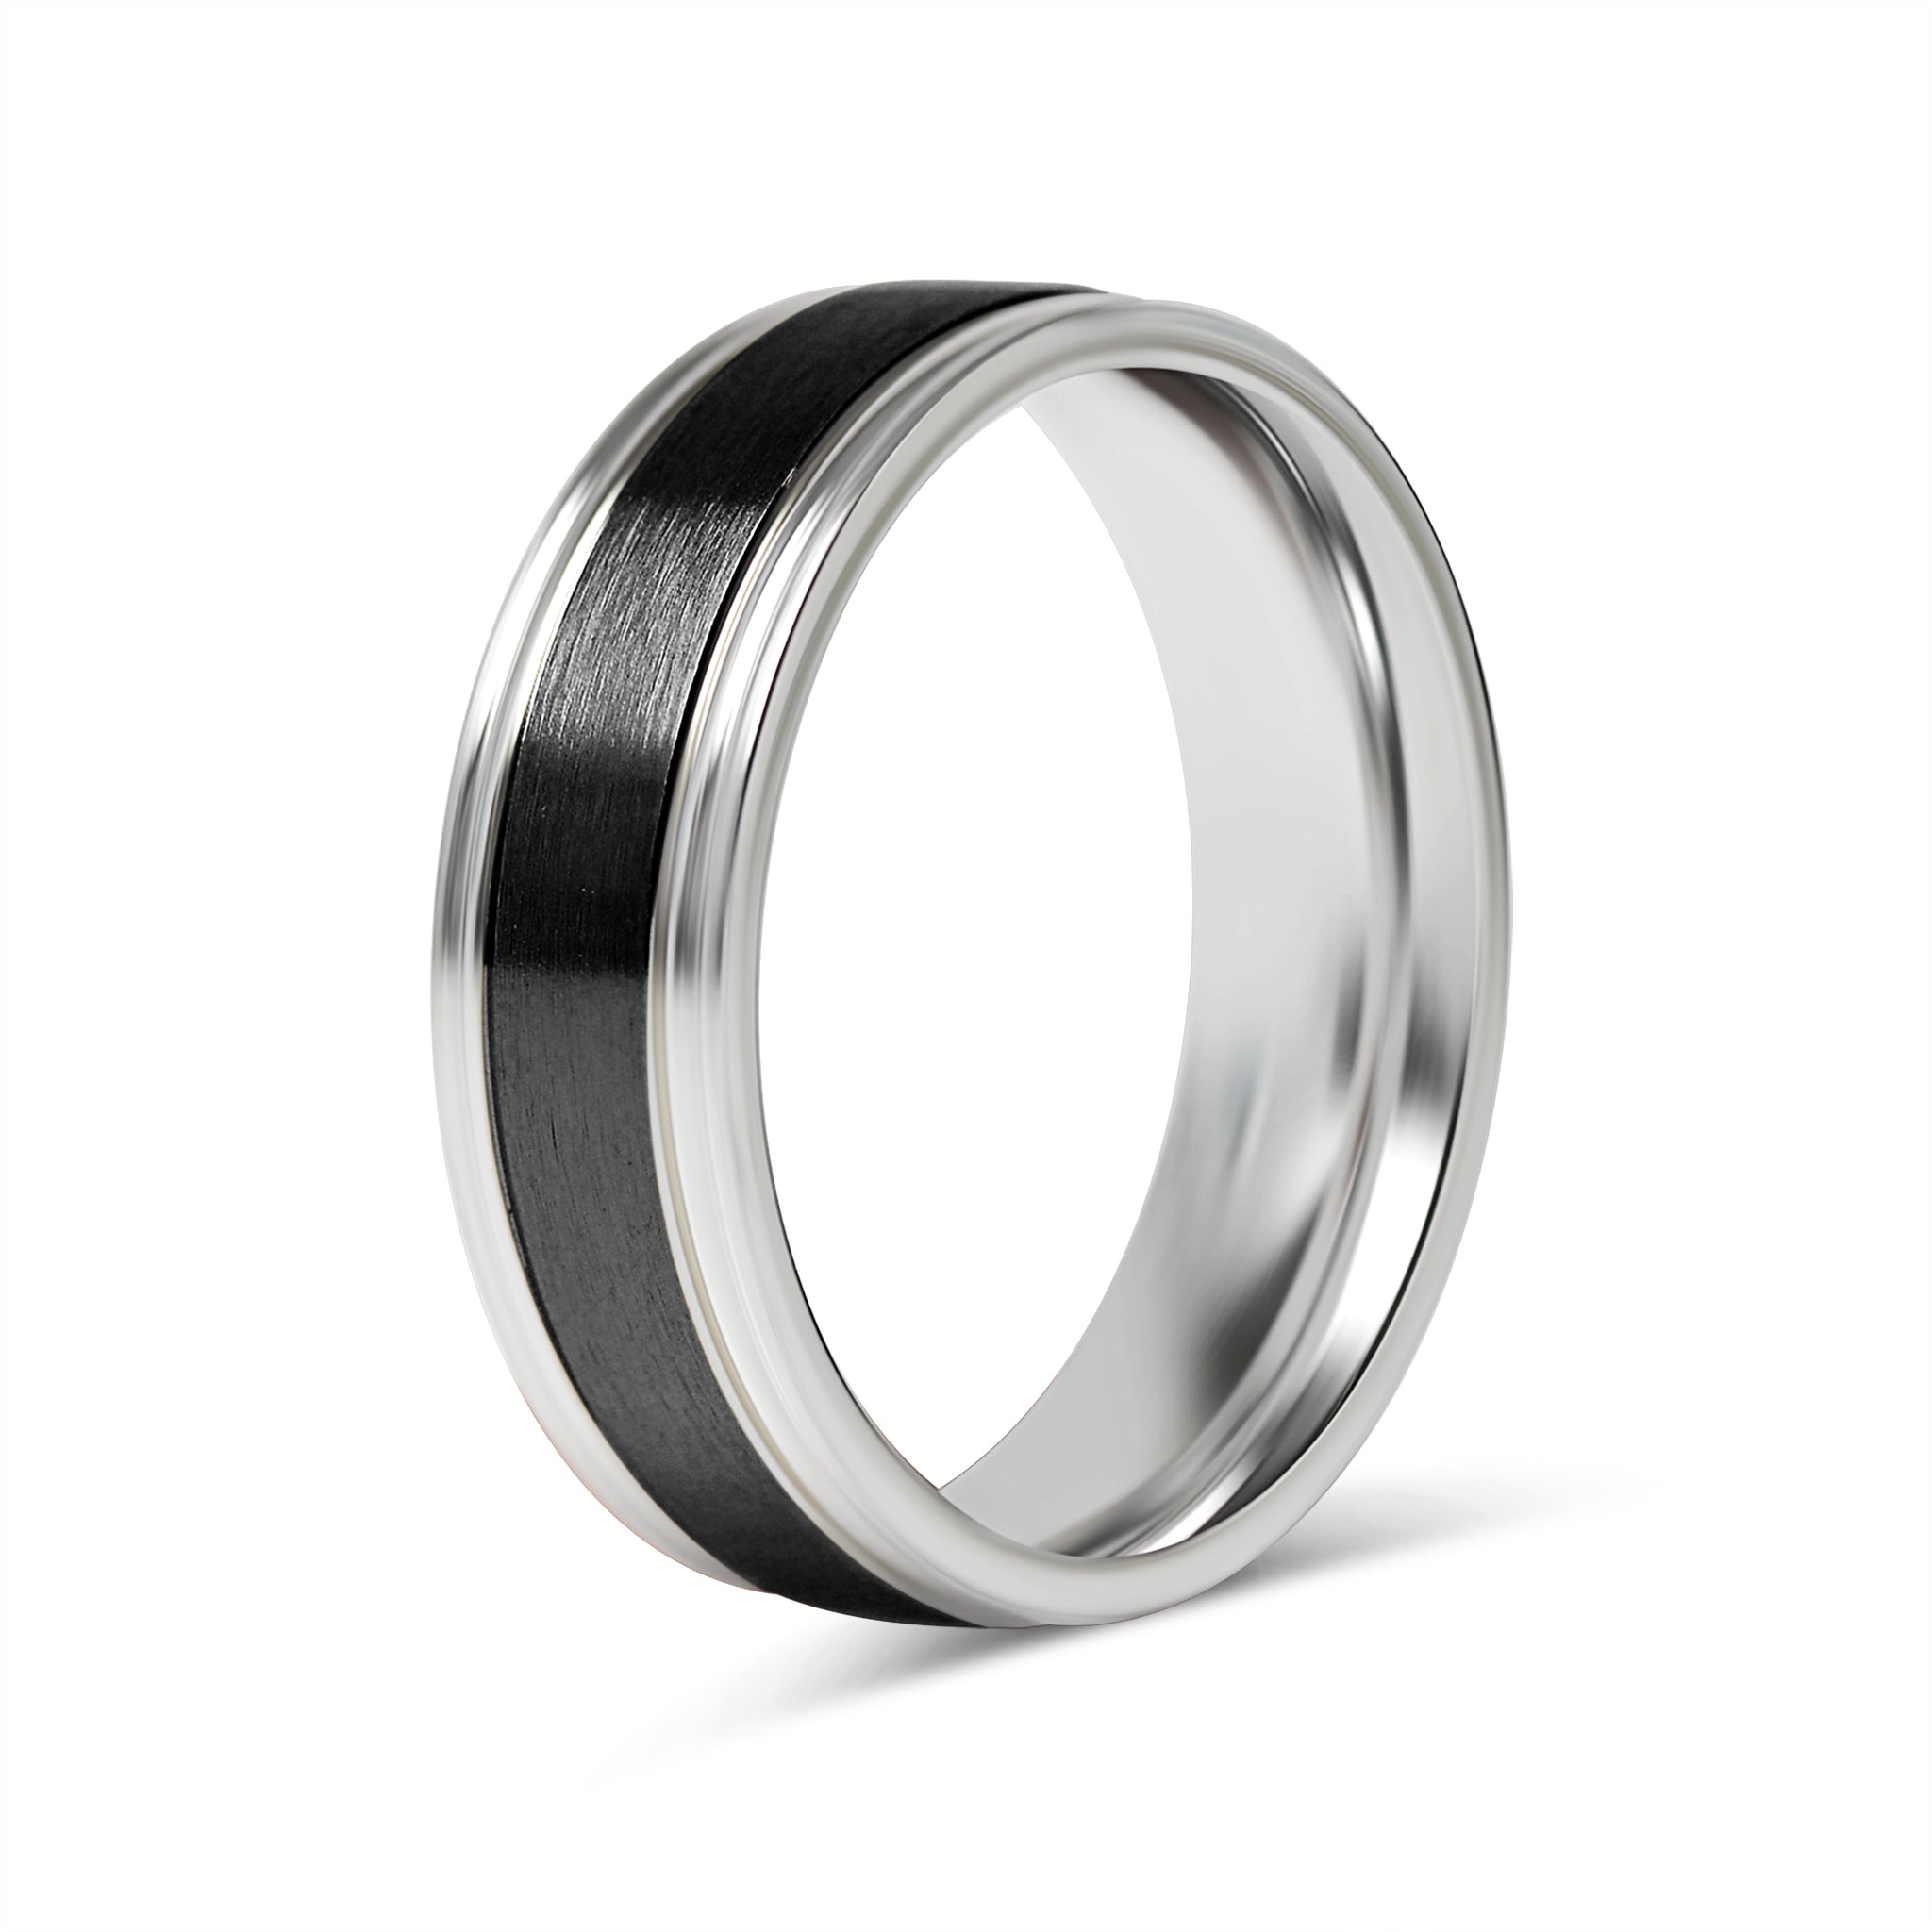 Wholesale Black Center Polished Stainless Steel Ring Stamping Engraving 6mm